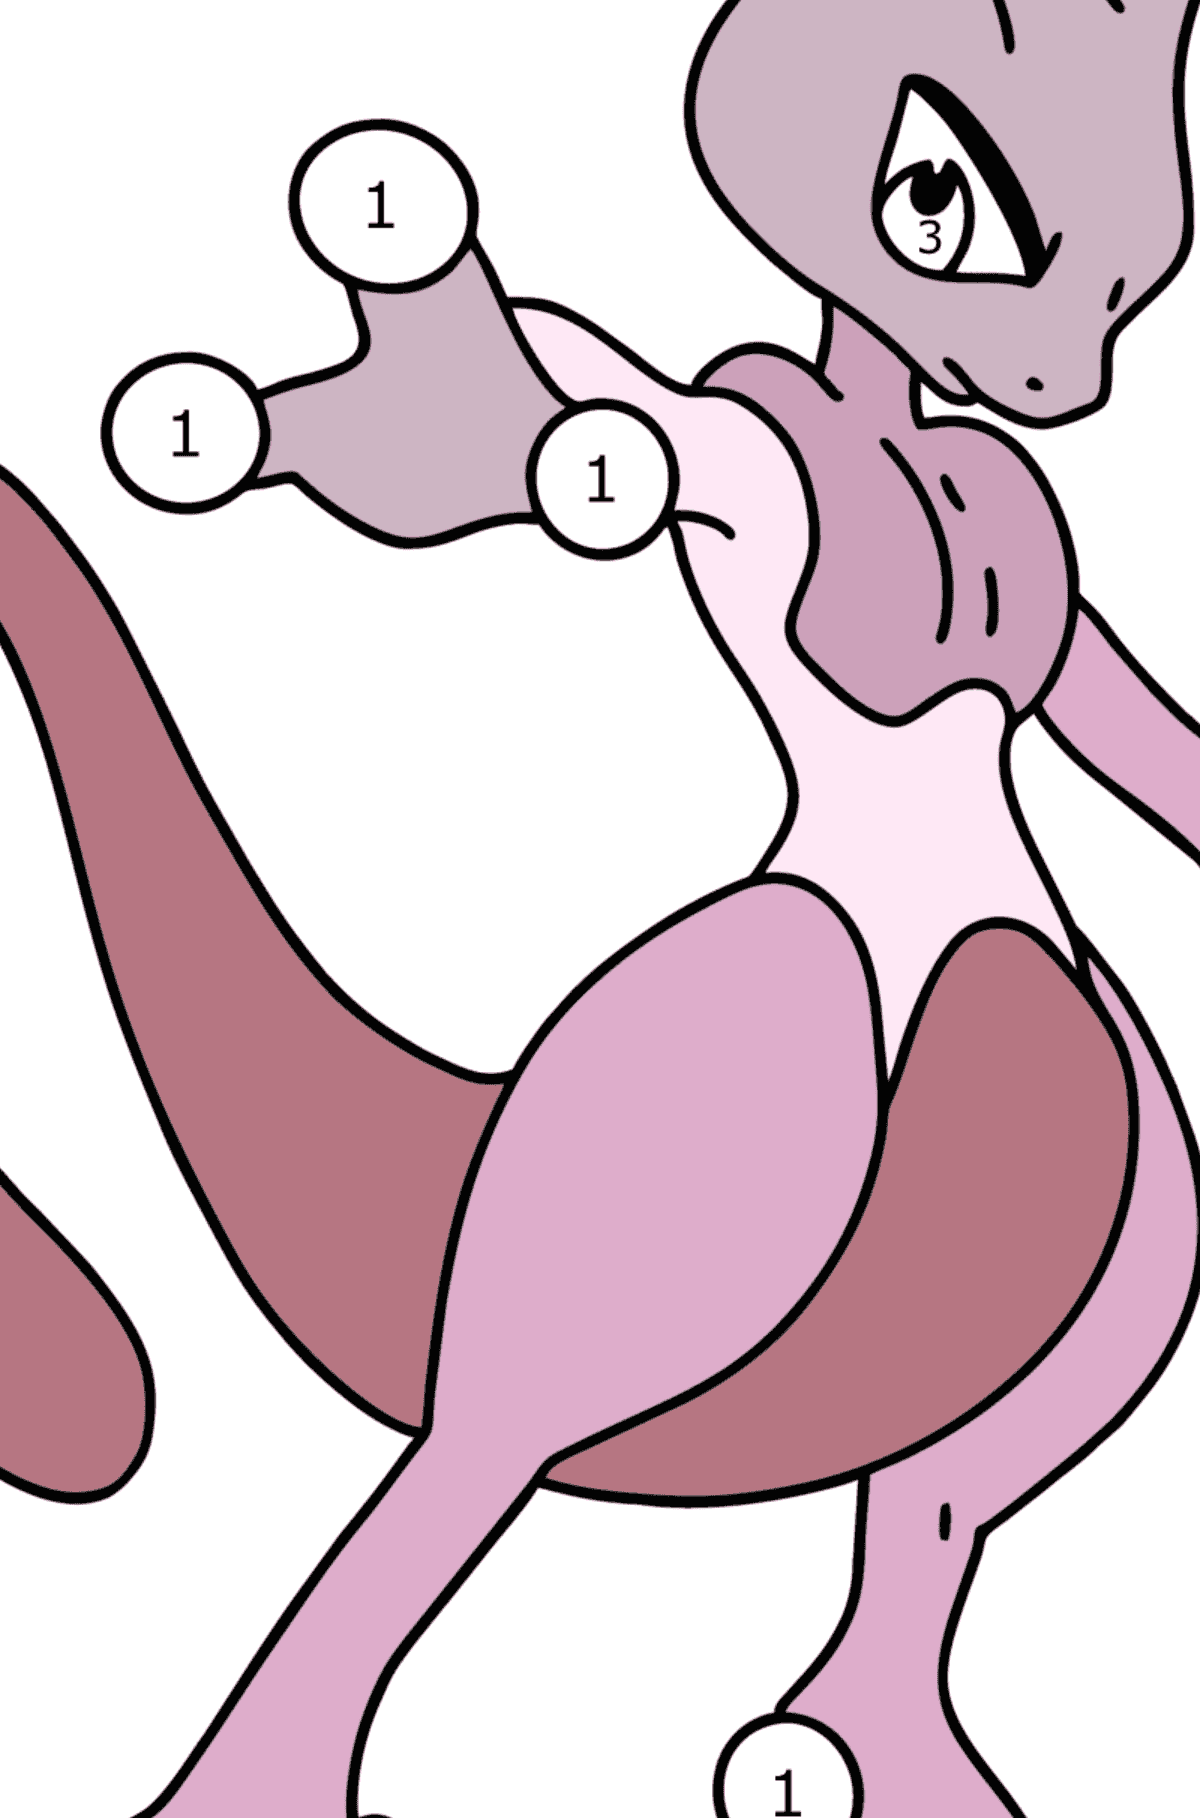 Coloring page Pokemon Go Mewtwo - Coloring by Numbers for Kids